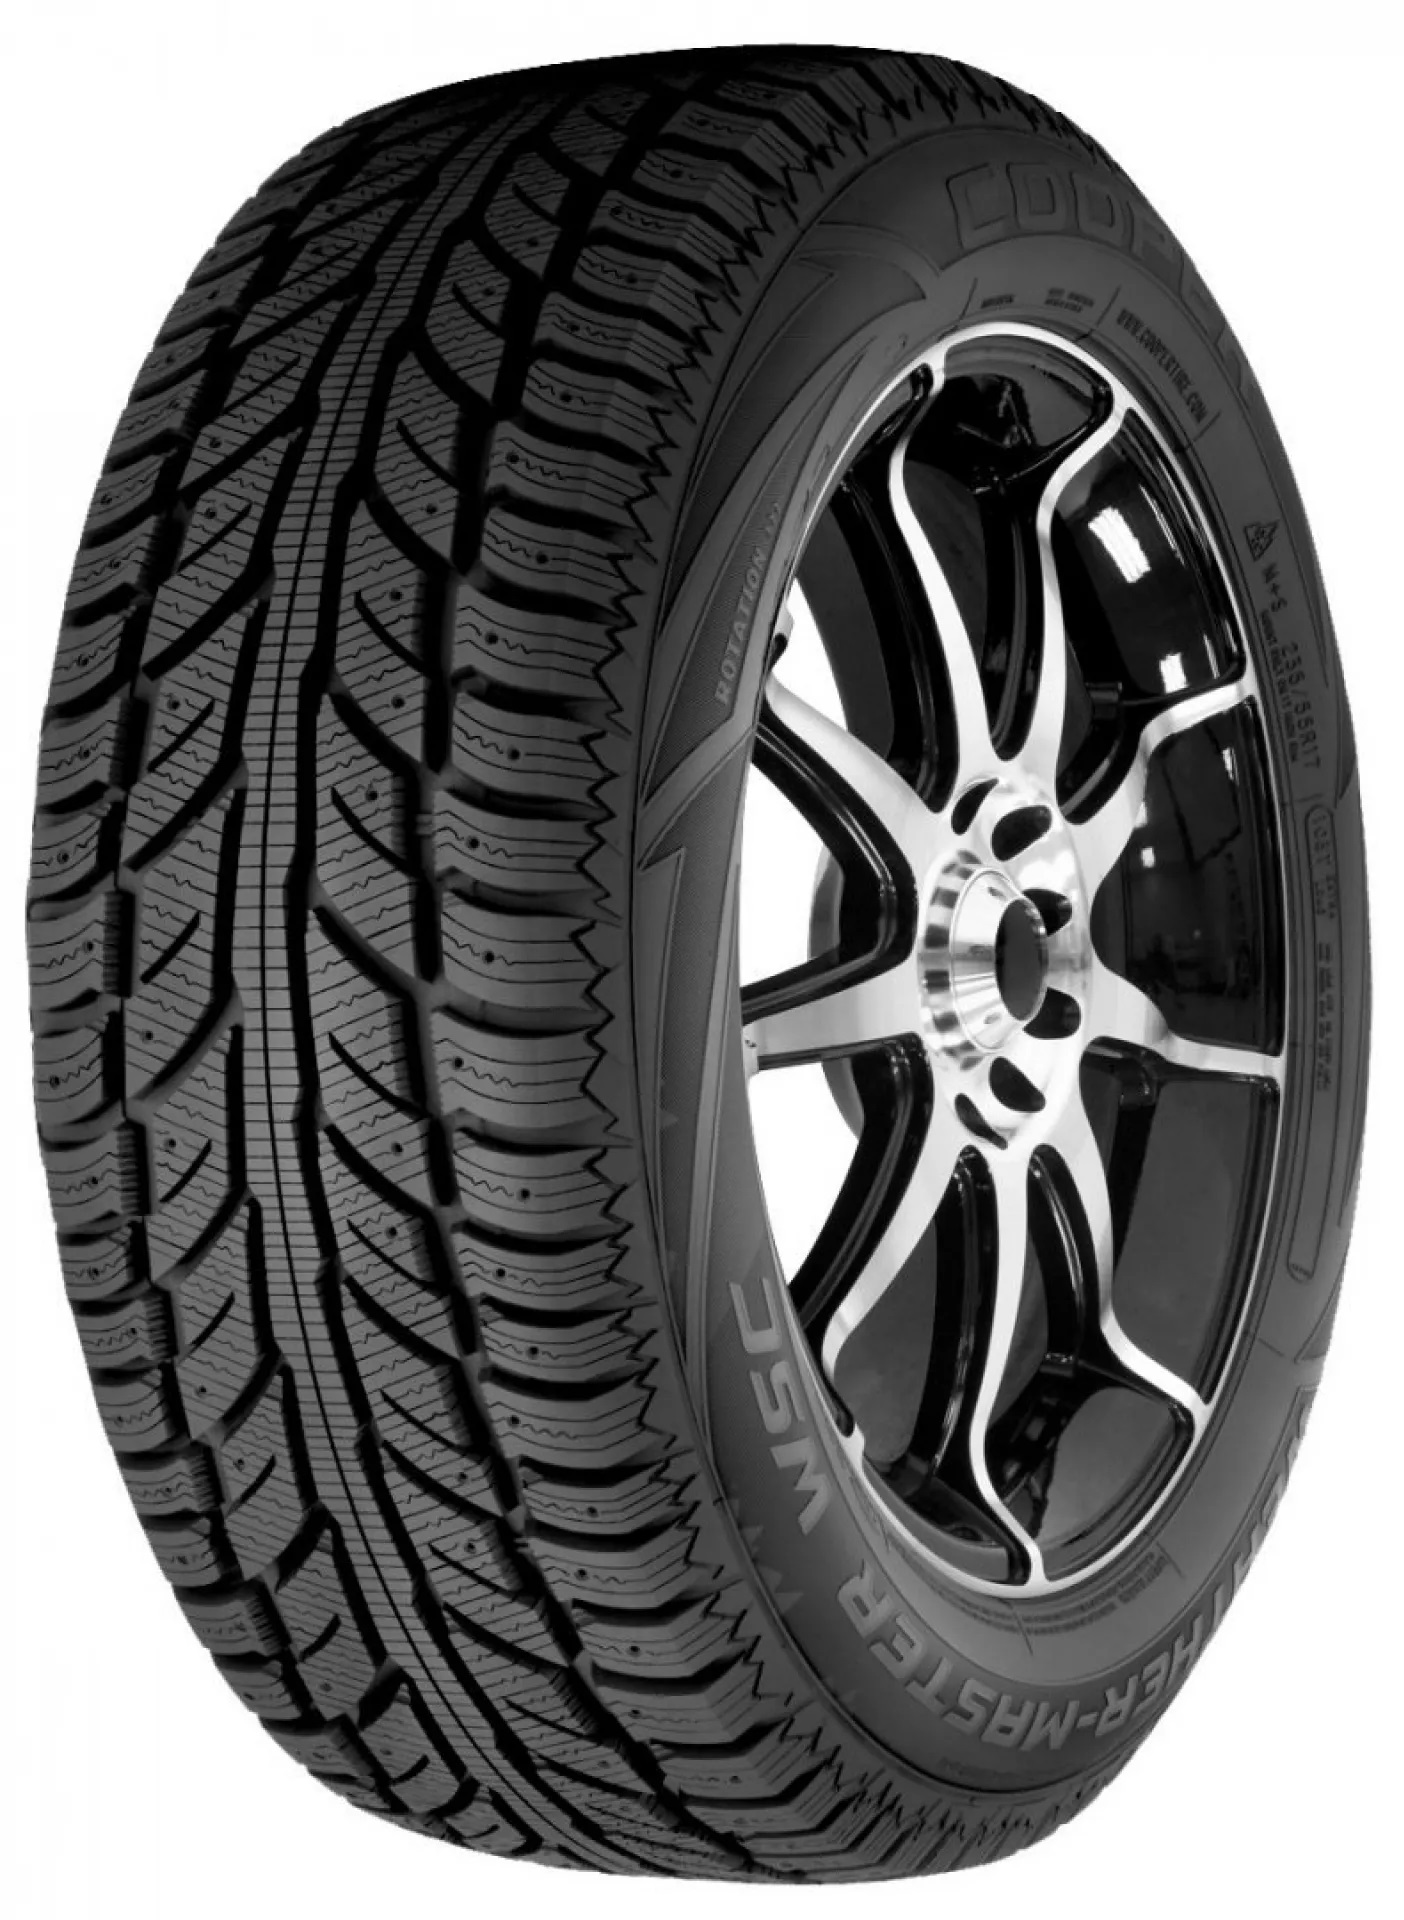 Tyres Cooper 265/70/16 WEATHERMASTER WSC 112Τ for SUV/4x4